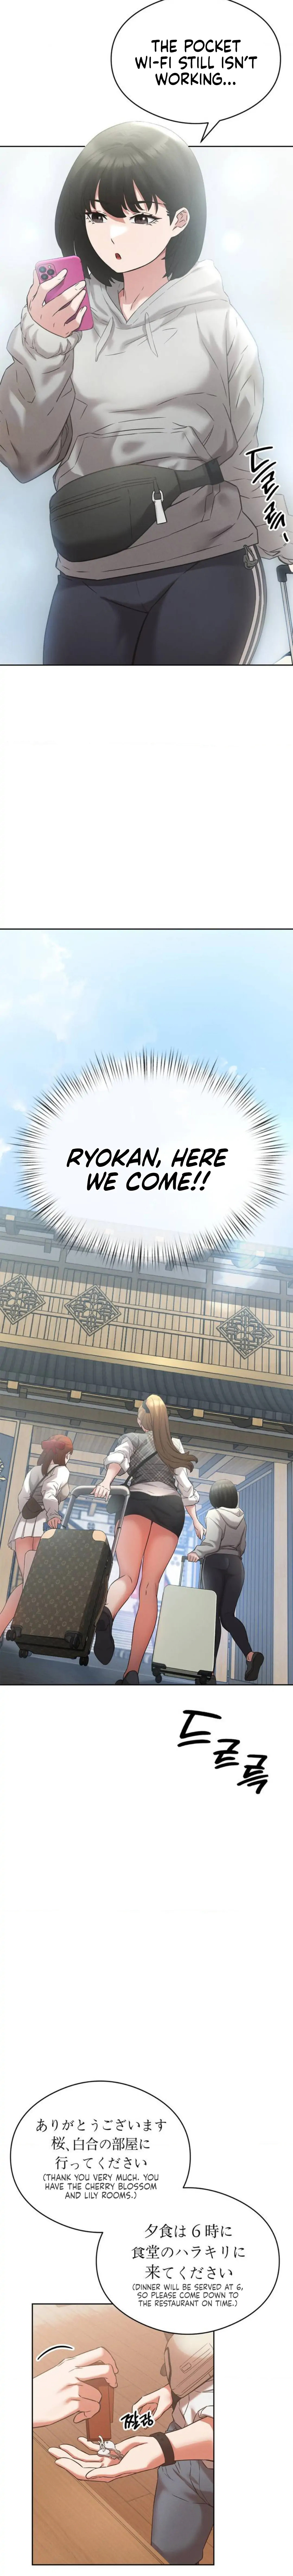 Shall We Go To The Ryokan Together? - Chapter 1 Page 23